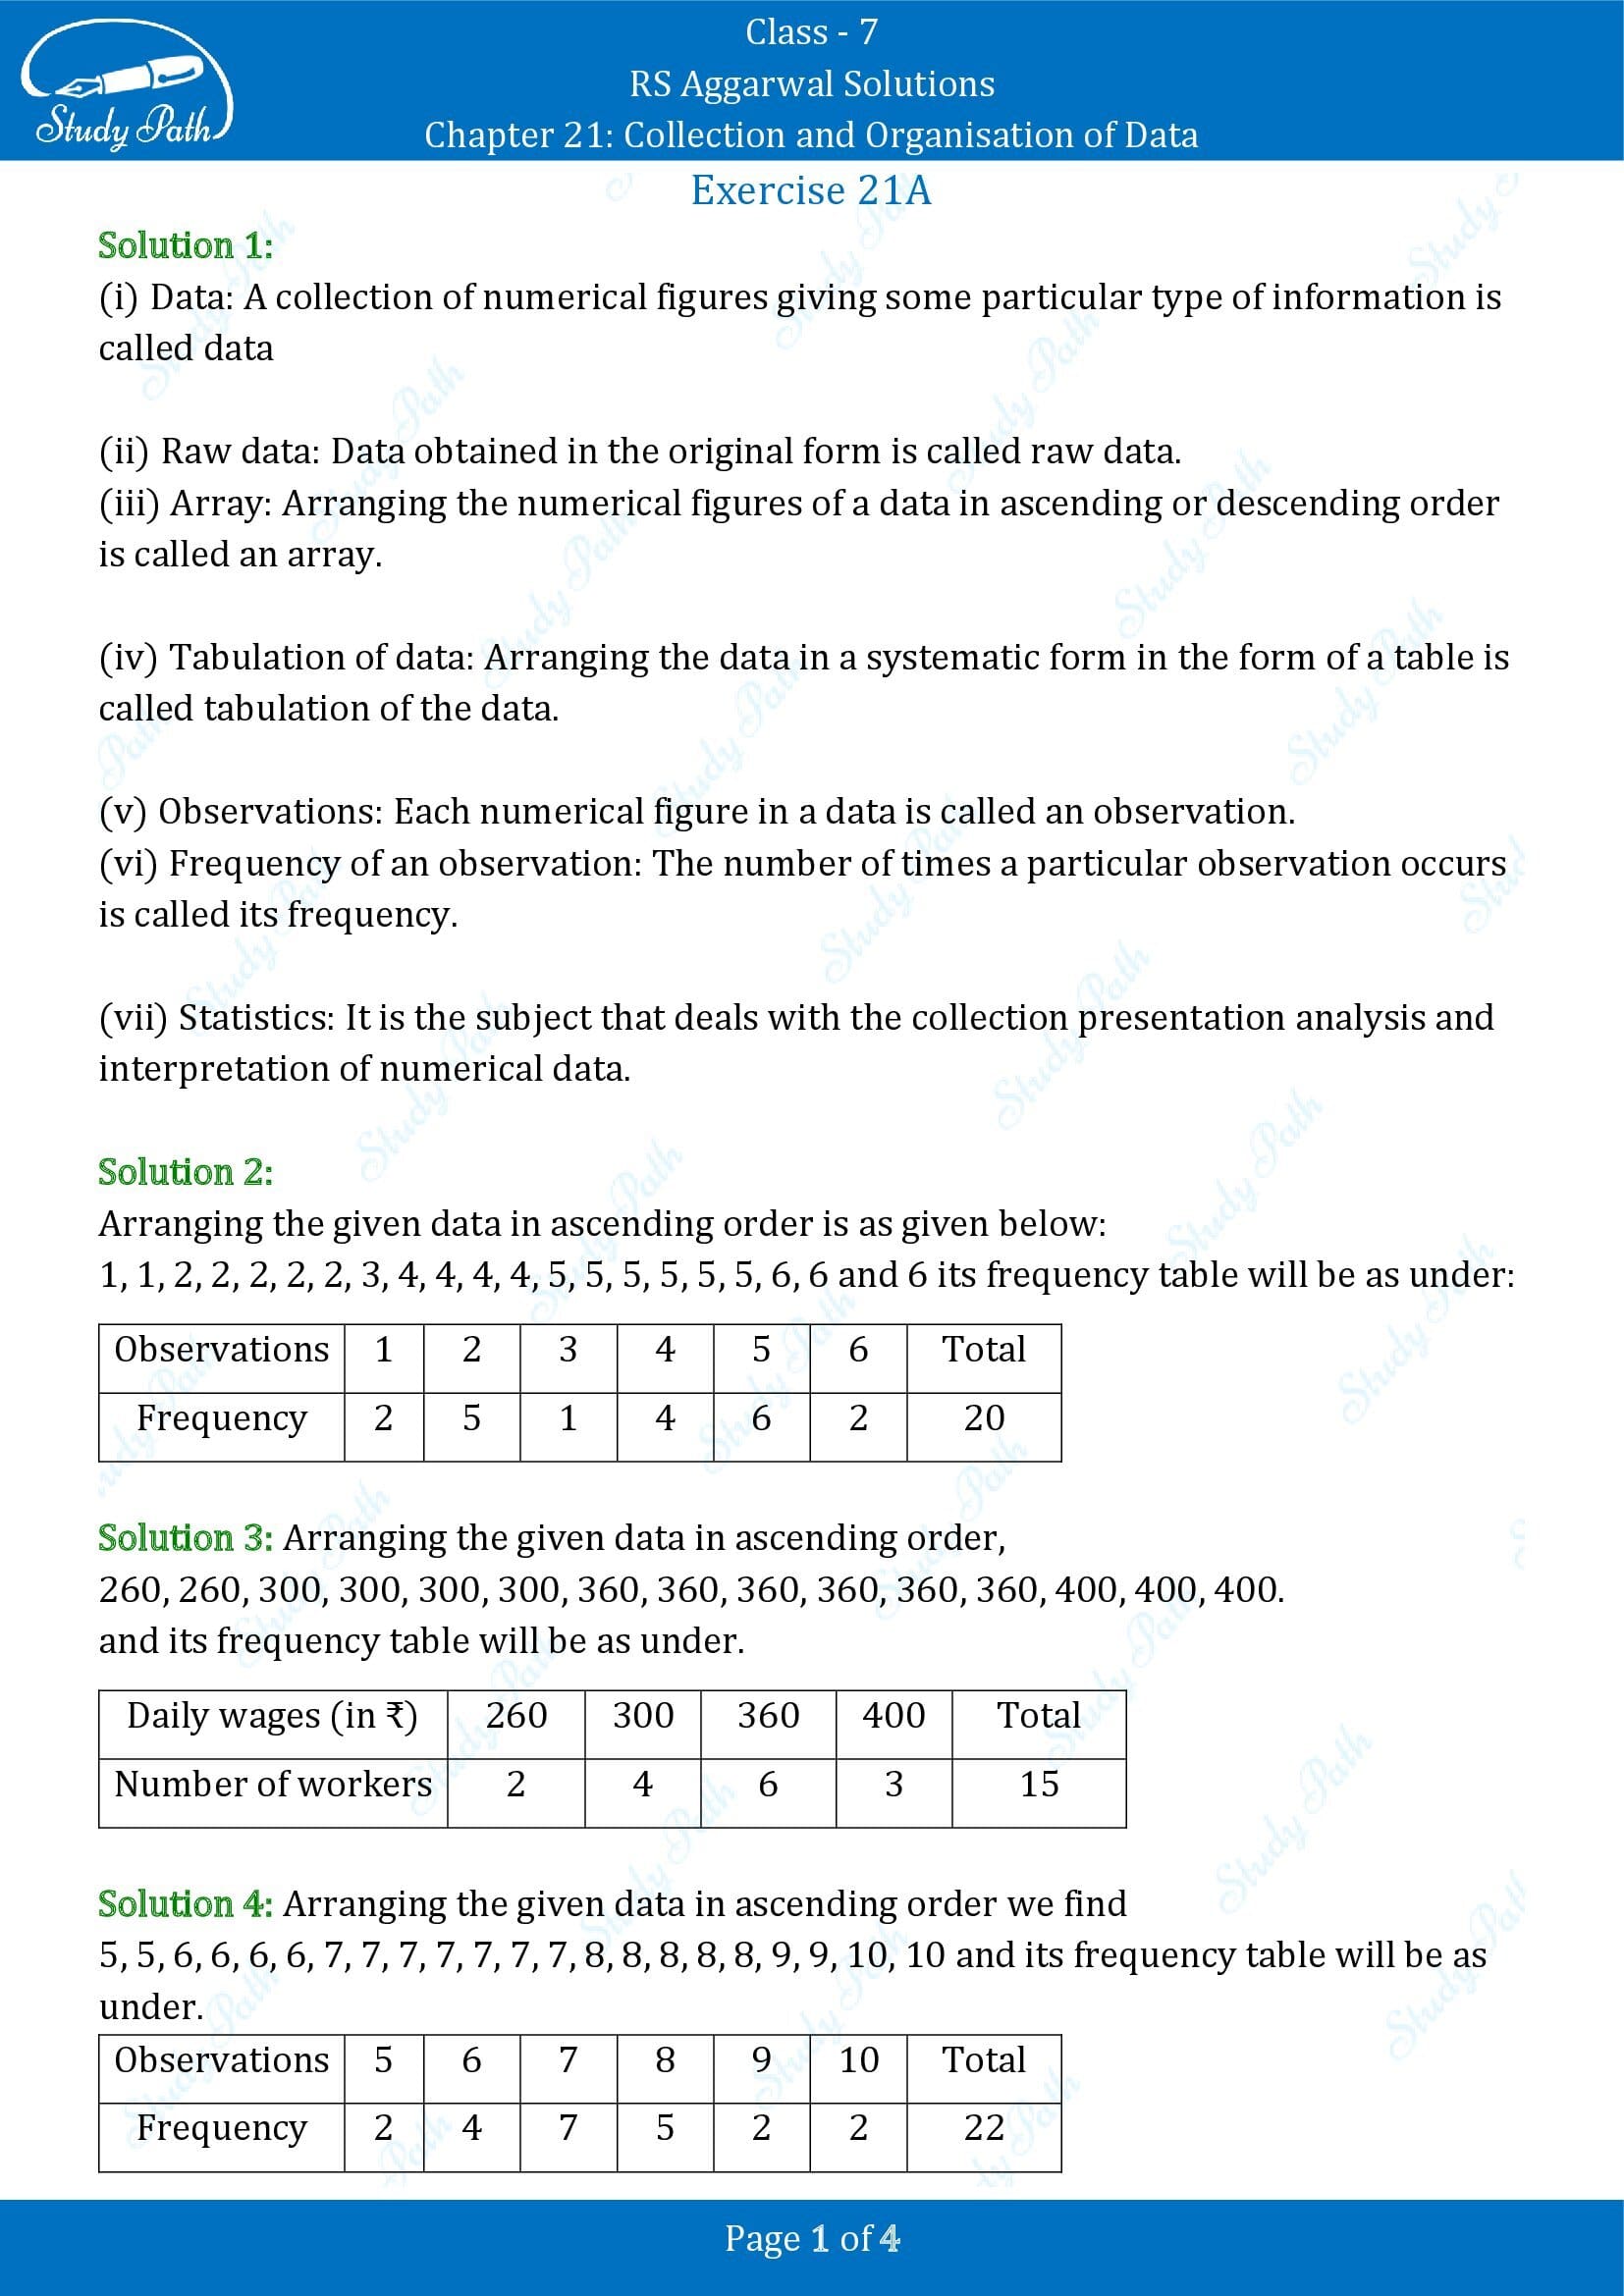 RS Aggarwal Solutions Class 7 Chapter 21 Collection and Organisation of Data Exercise 21A 0001